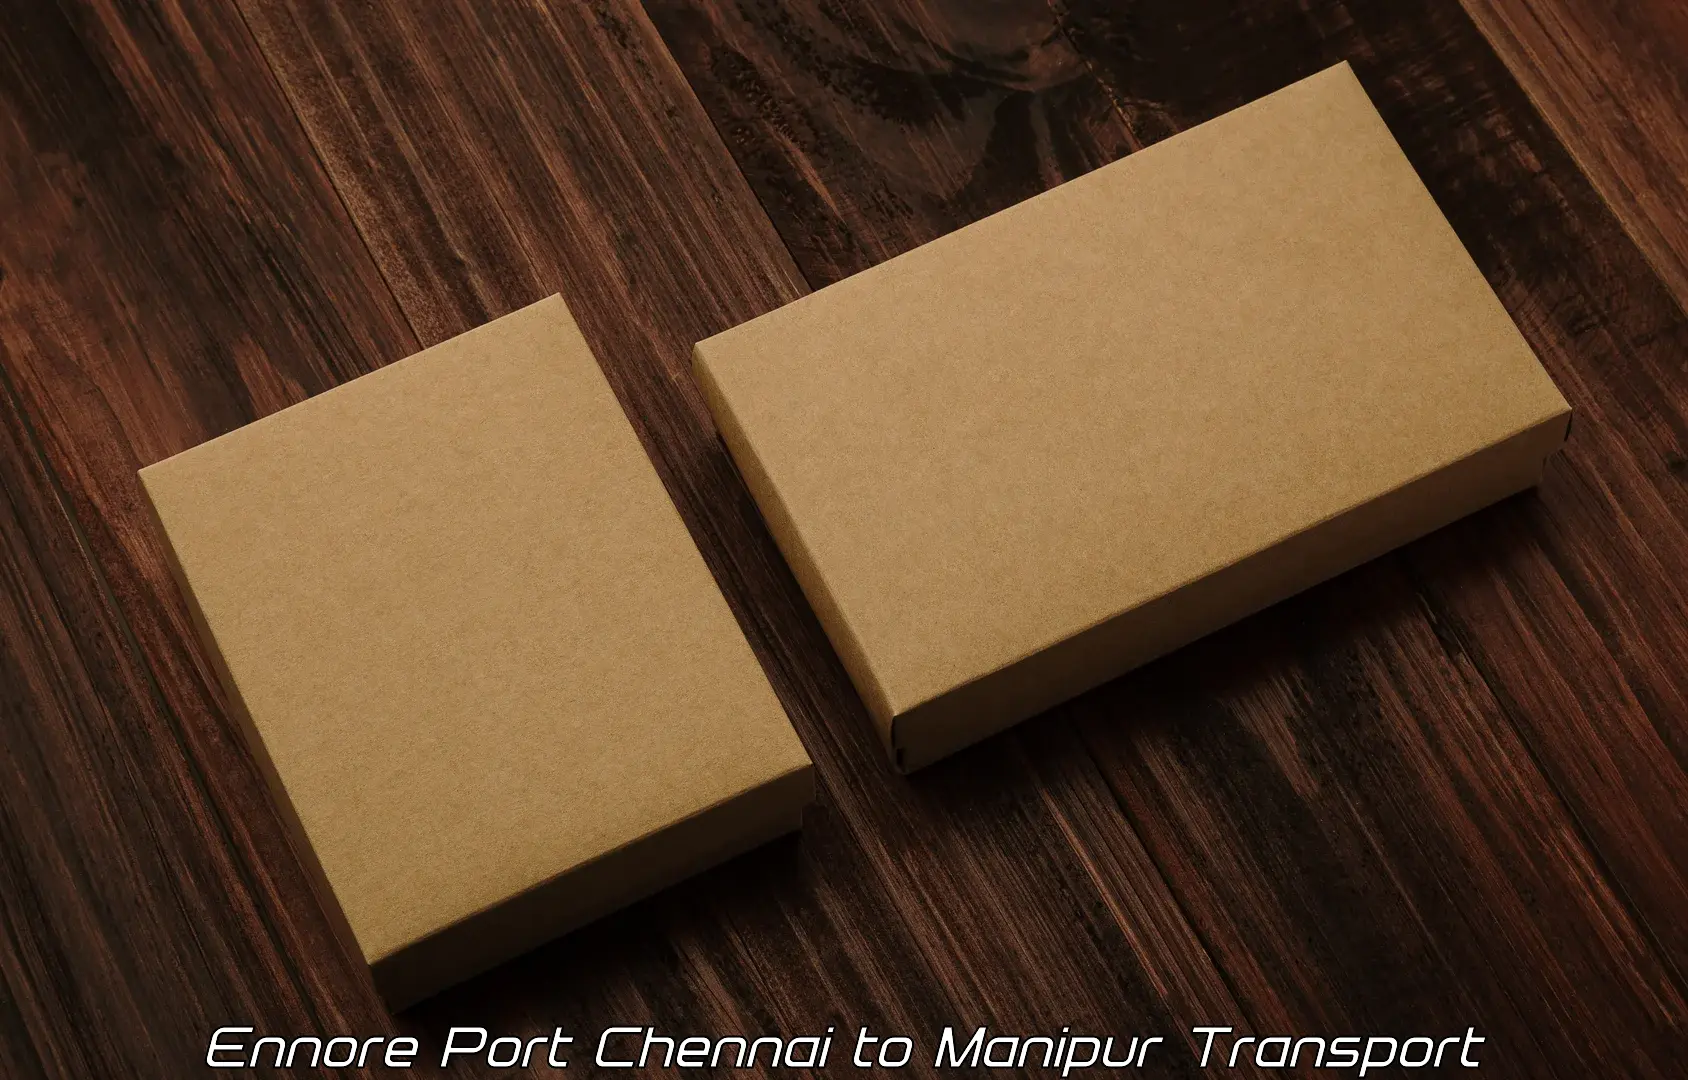 Door to door transport services Ennore Port Chennai to Moirang